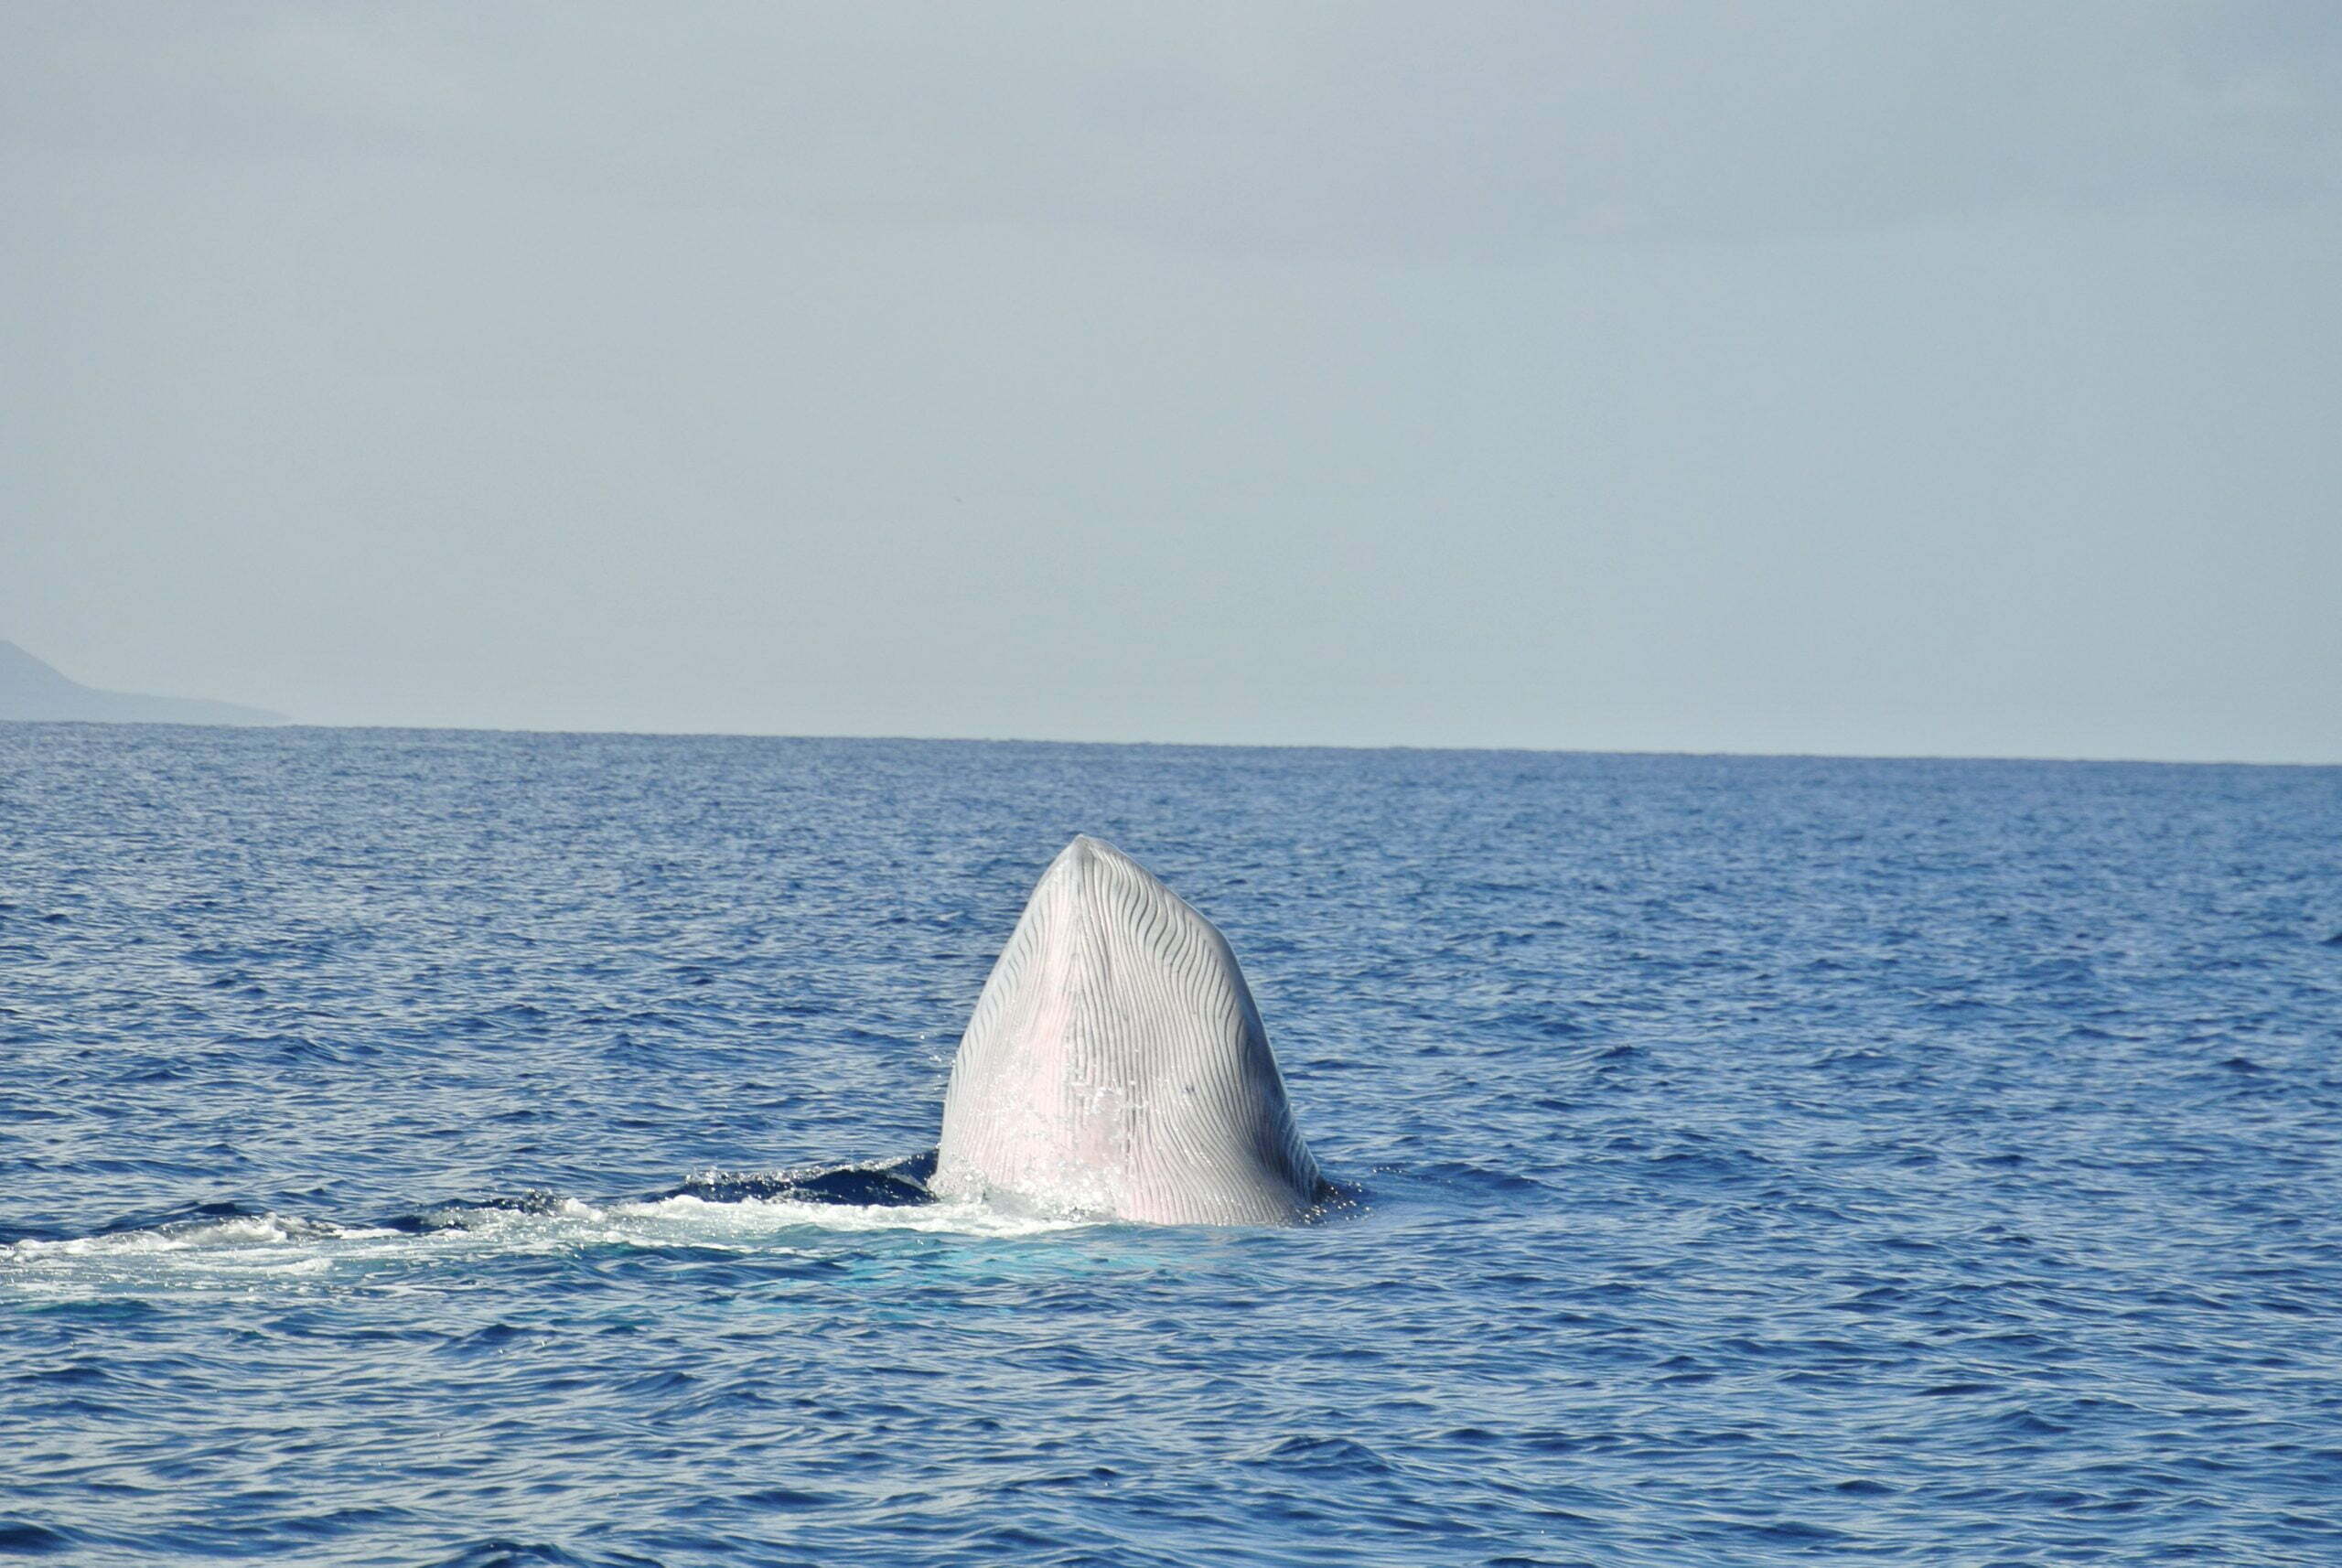 Brydes Whale Spy Hopping - Lanzarote